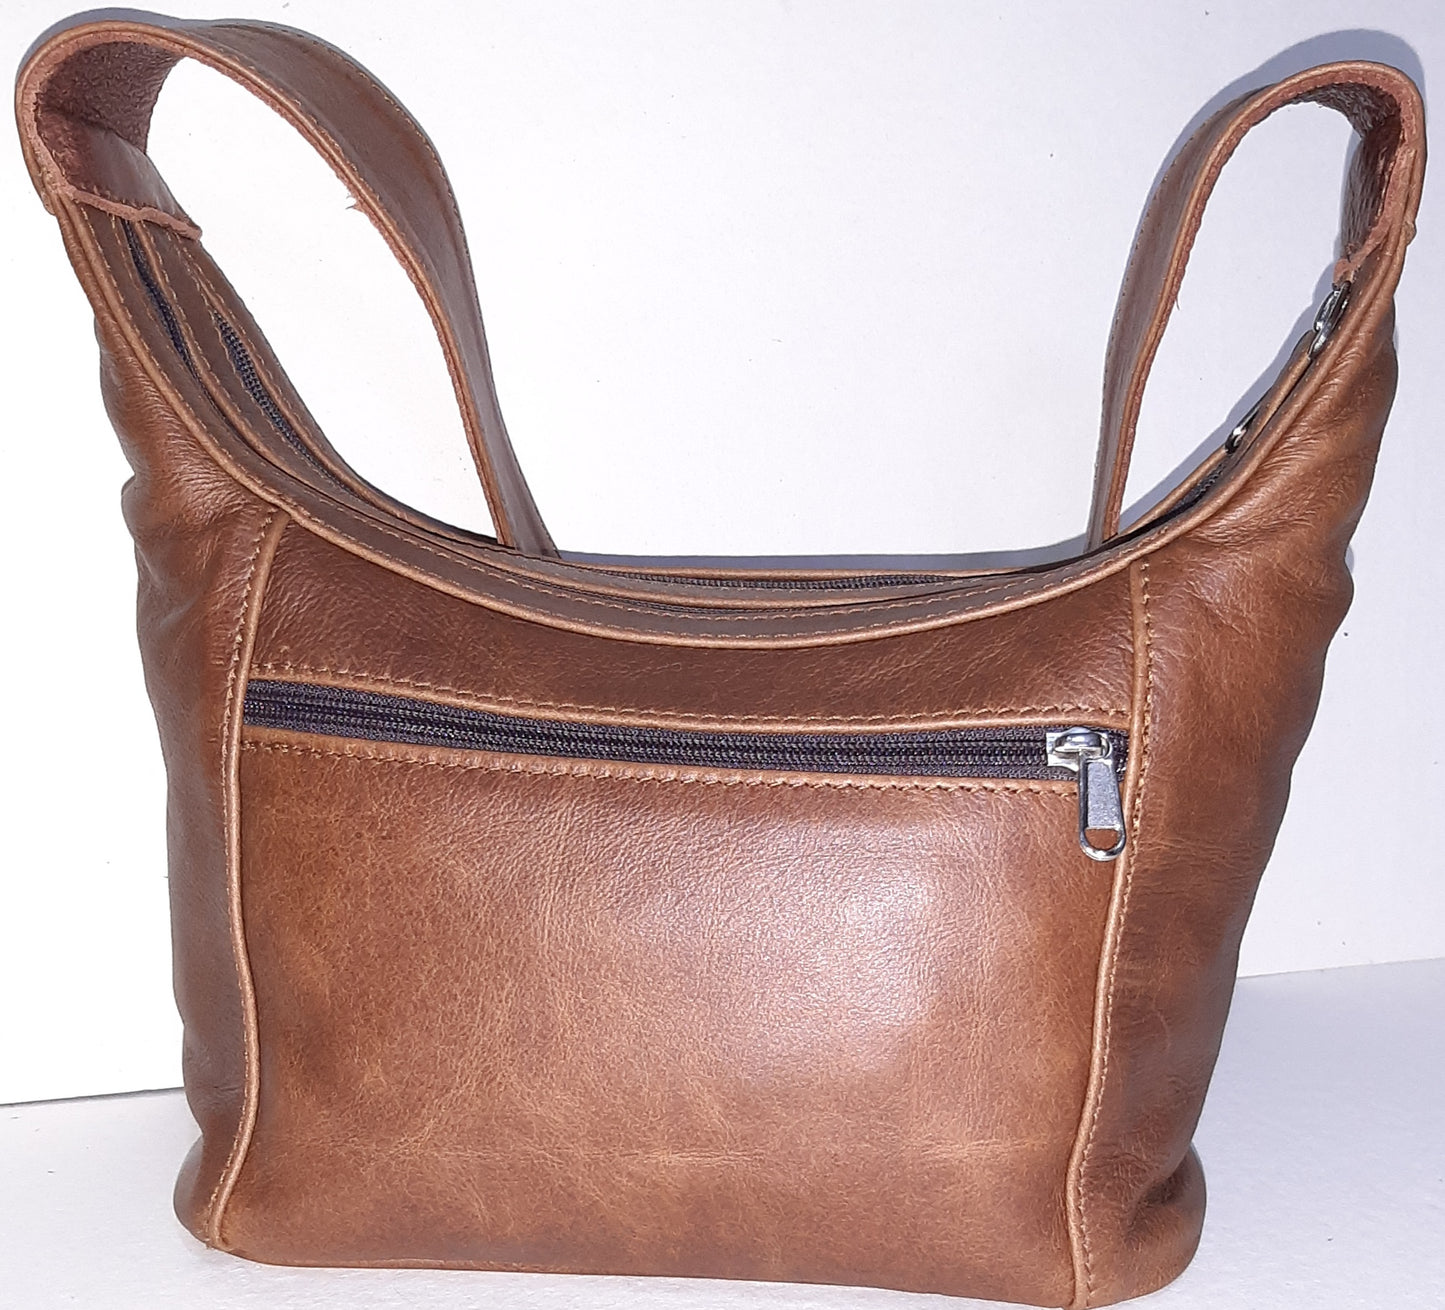 Gbs leather bags - cape Masai Leather